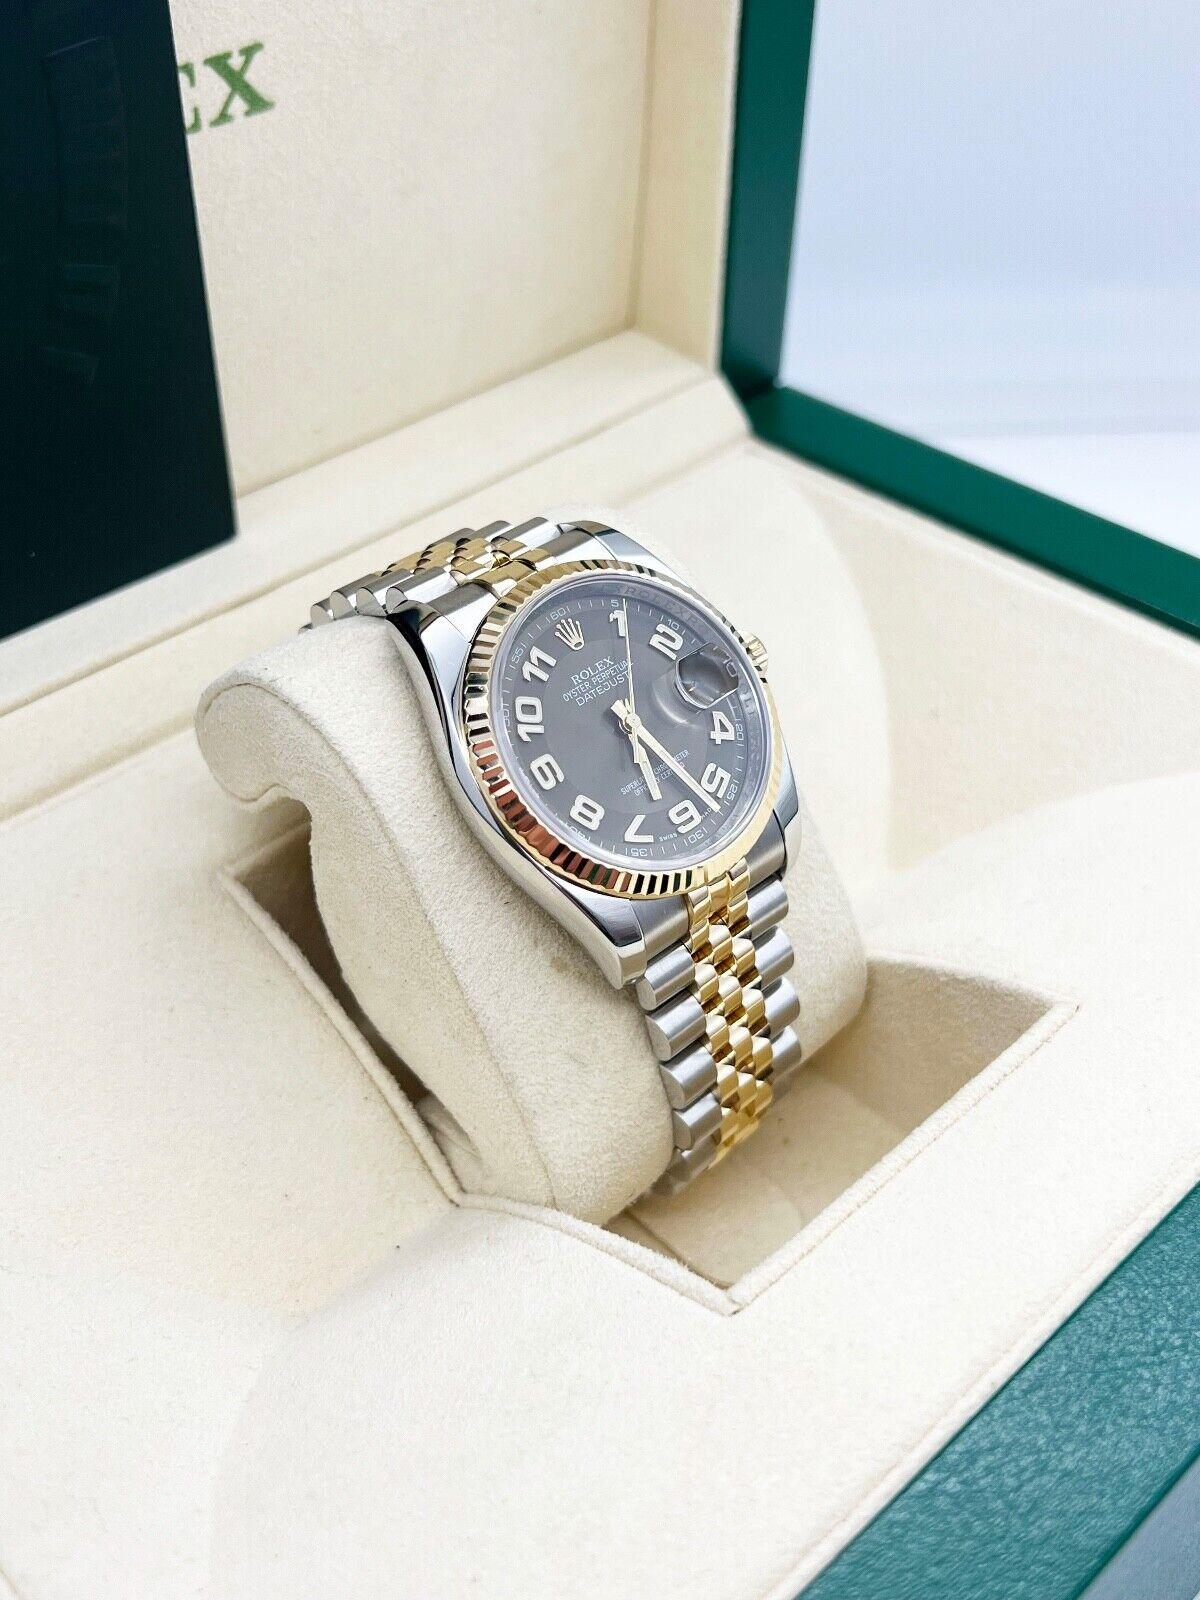 Rolex Datejust 116233 Bronze Arabic Dial 18K Gold Stainless Steel Box Paper For Sale 3